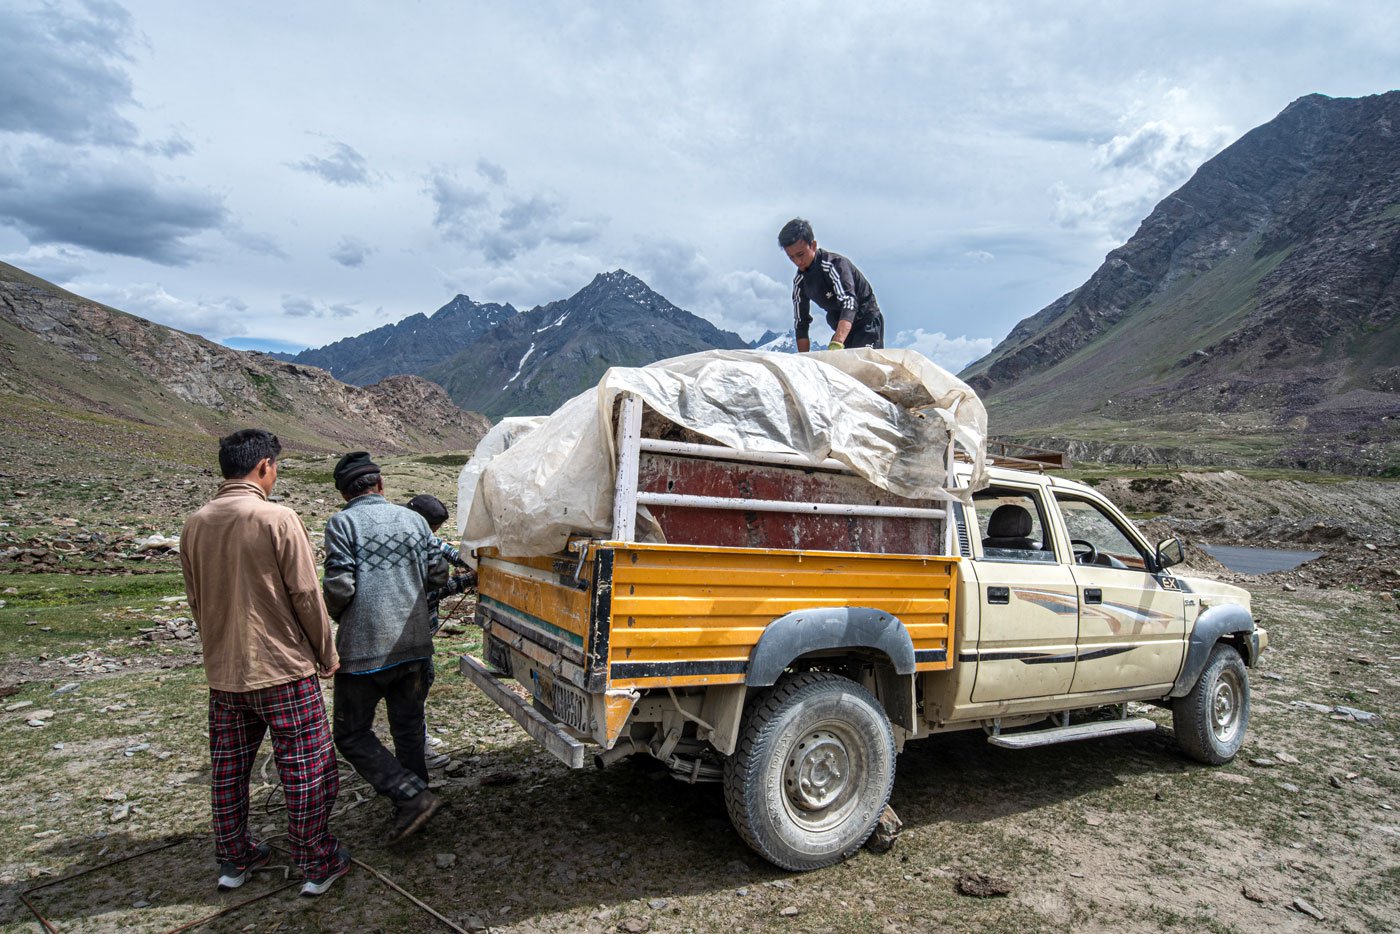 The pastoralists migrate back to their villages with their animals during winters. The family load the mini truck with dry yak dung to take back and use during winter